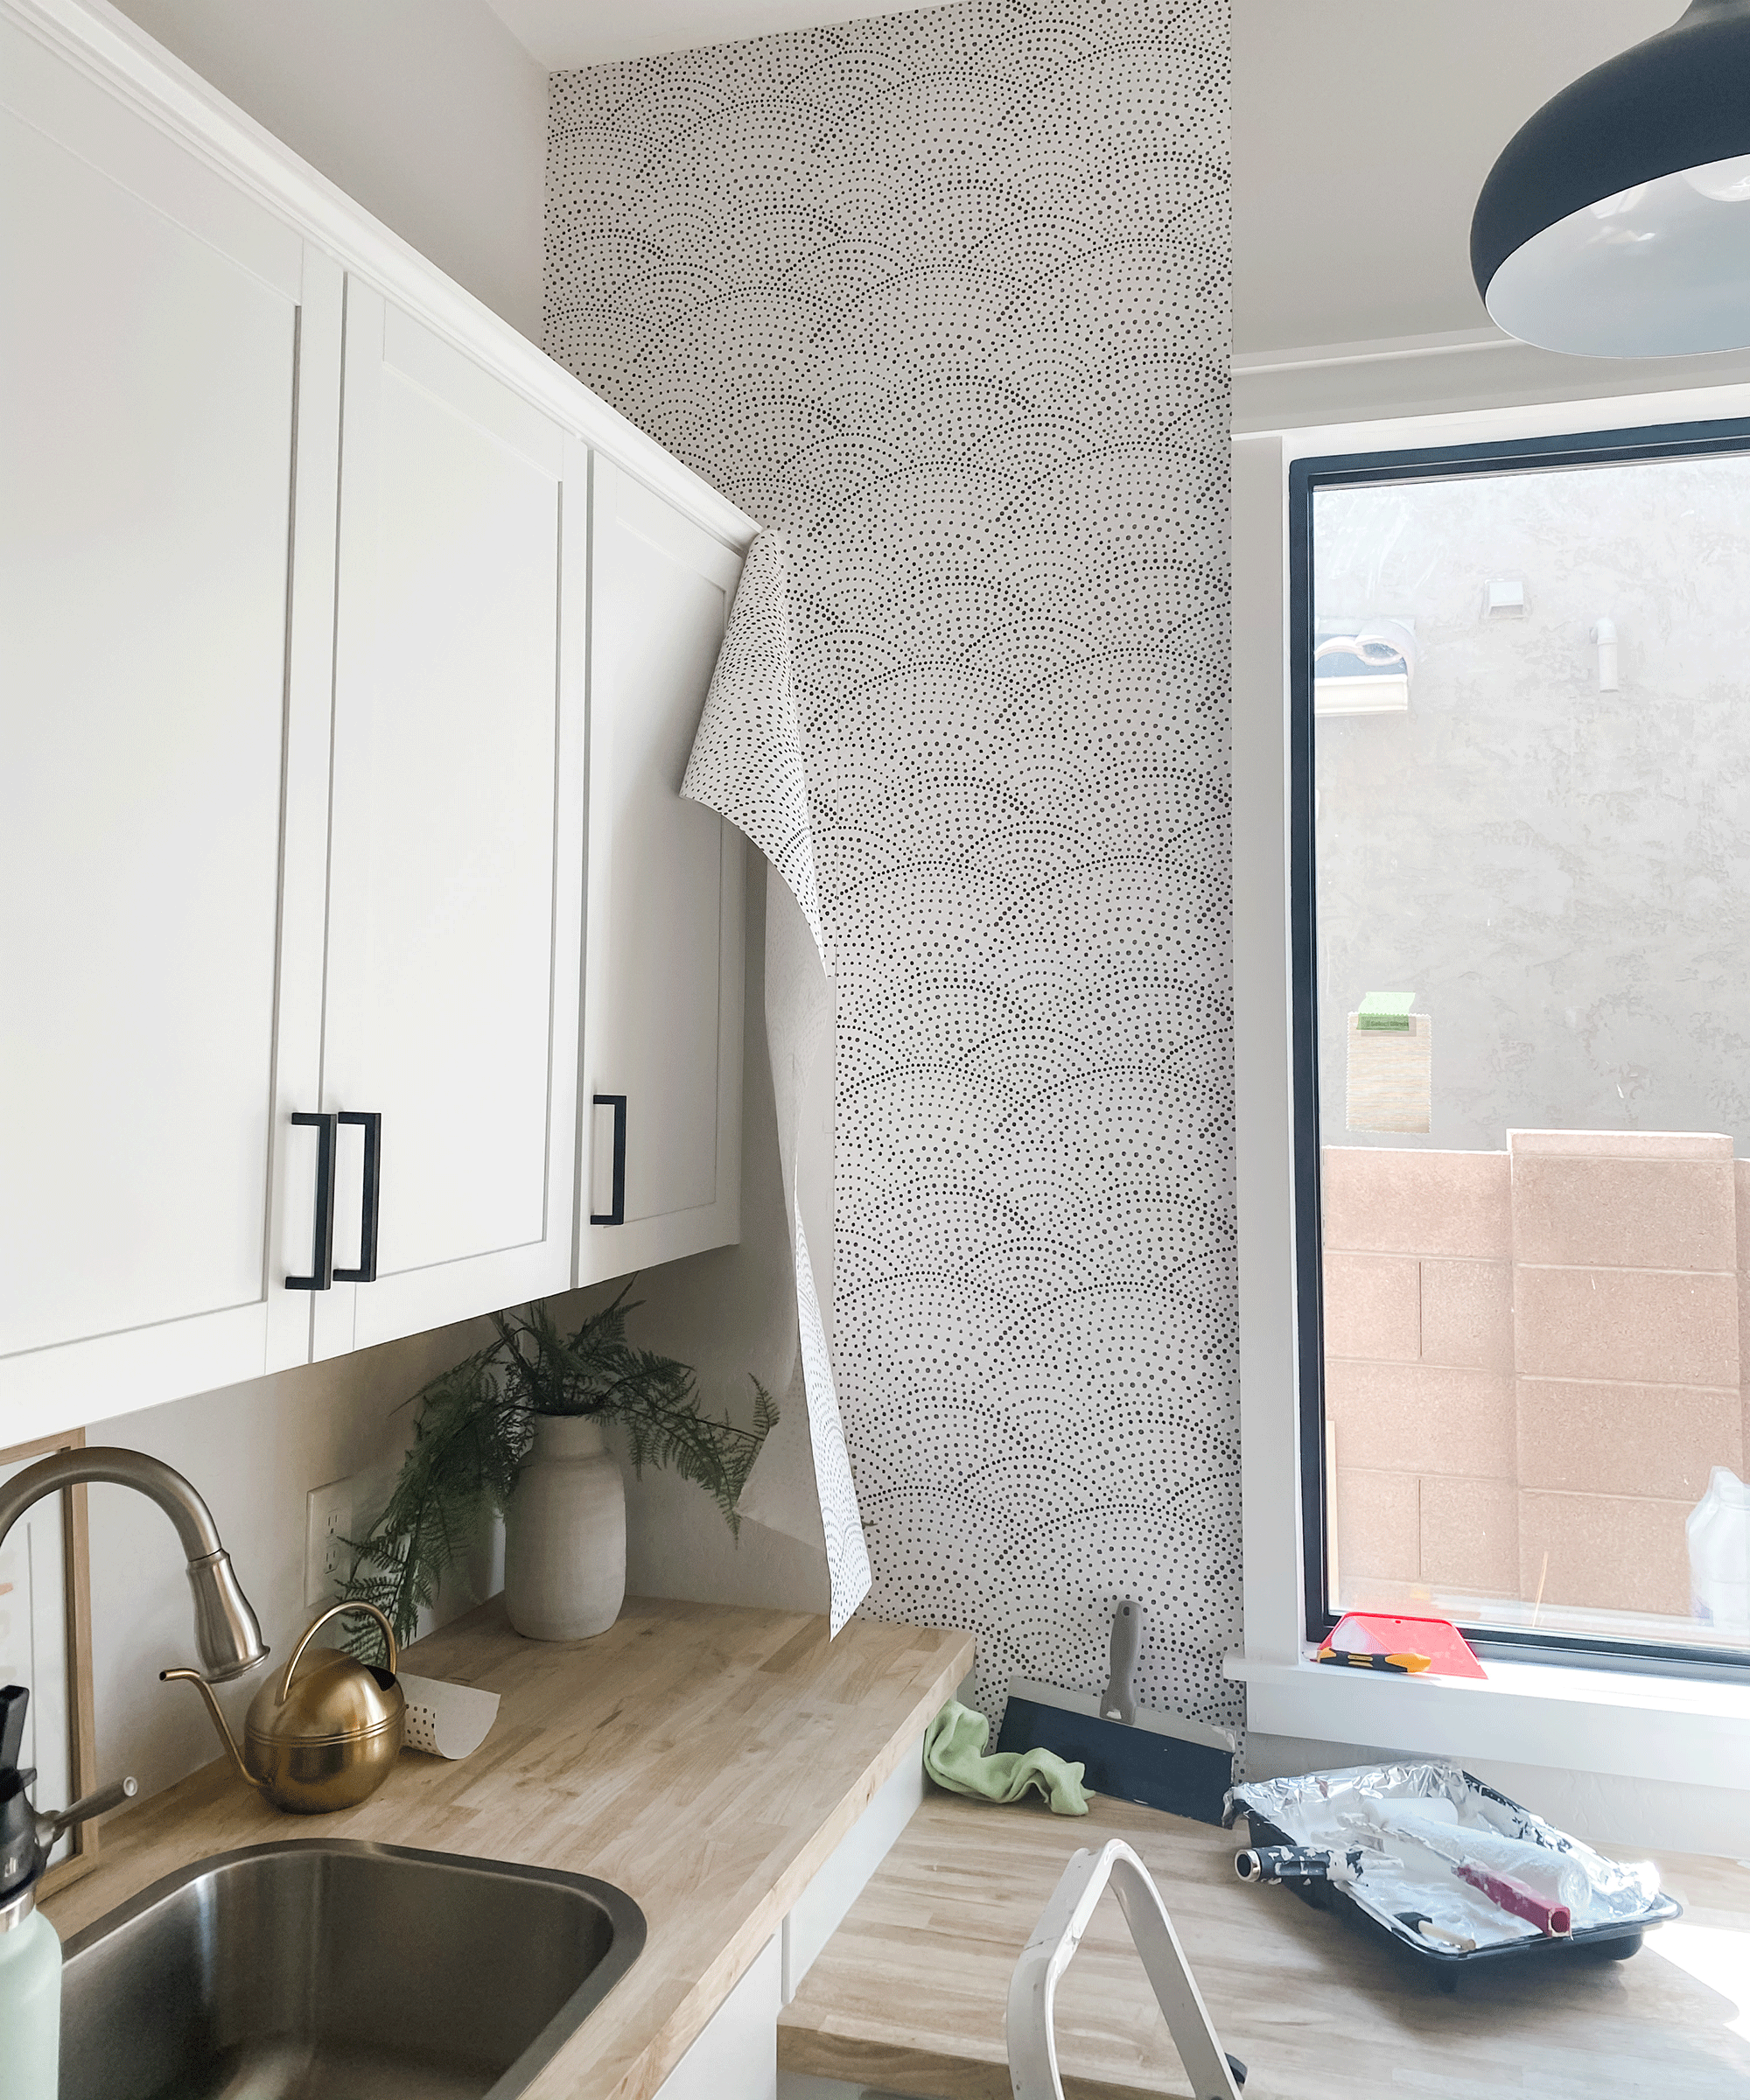 A kitchen with white cabinets with handle decor, monochrome spotted black and white wallpaper covering and modern round light fitting